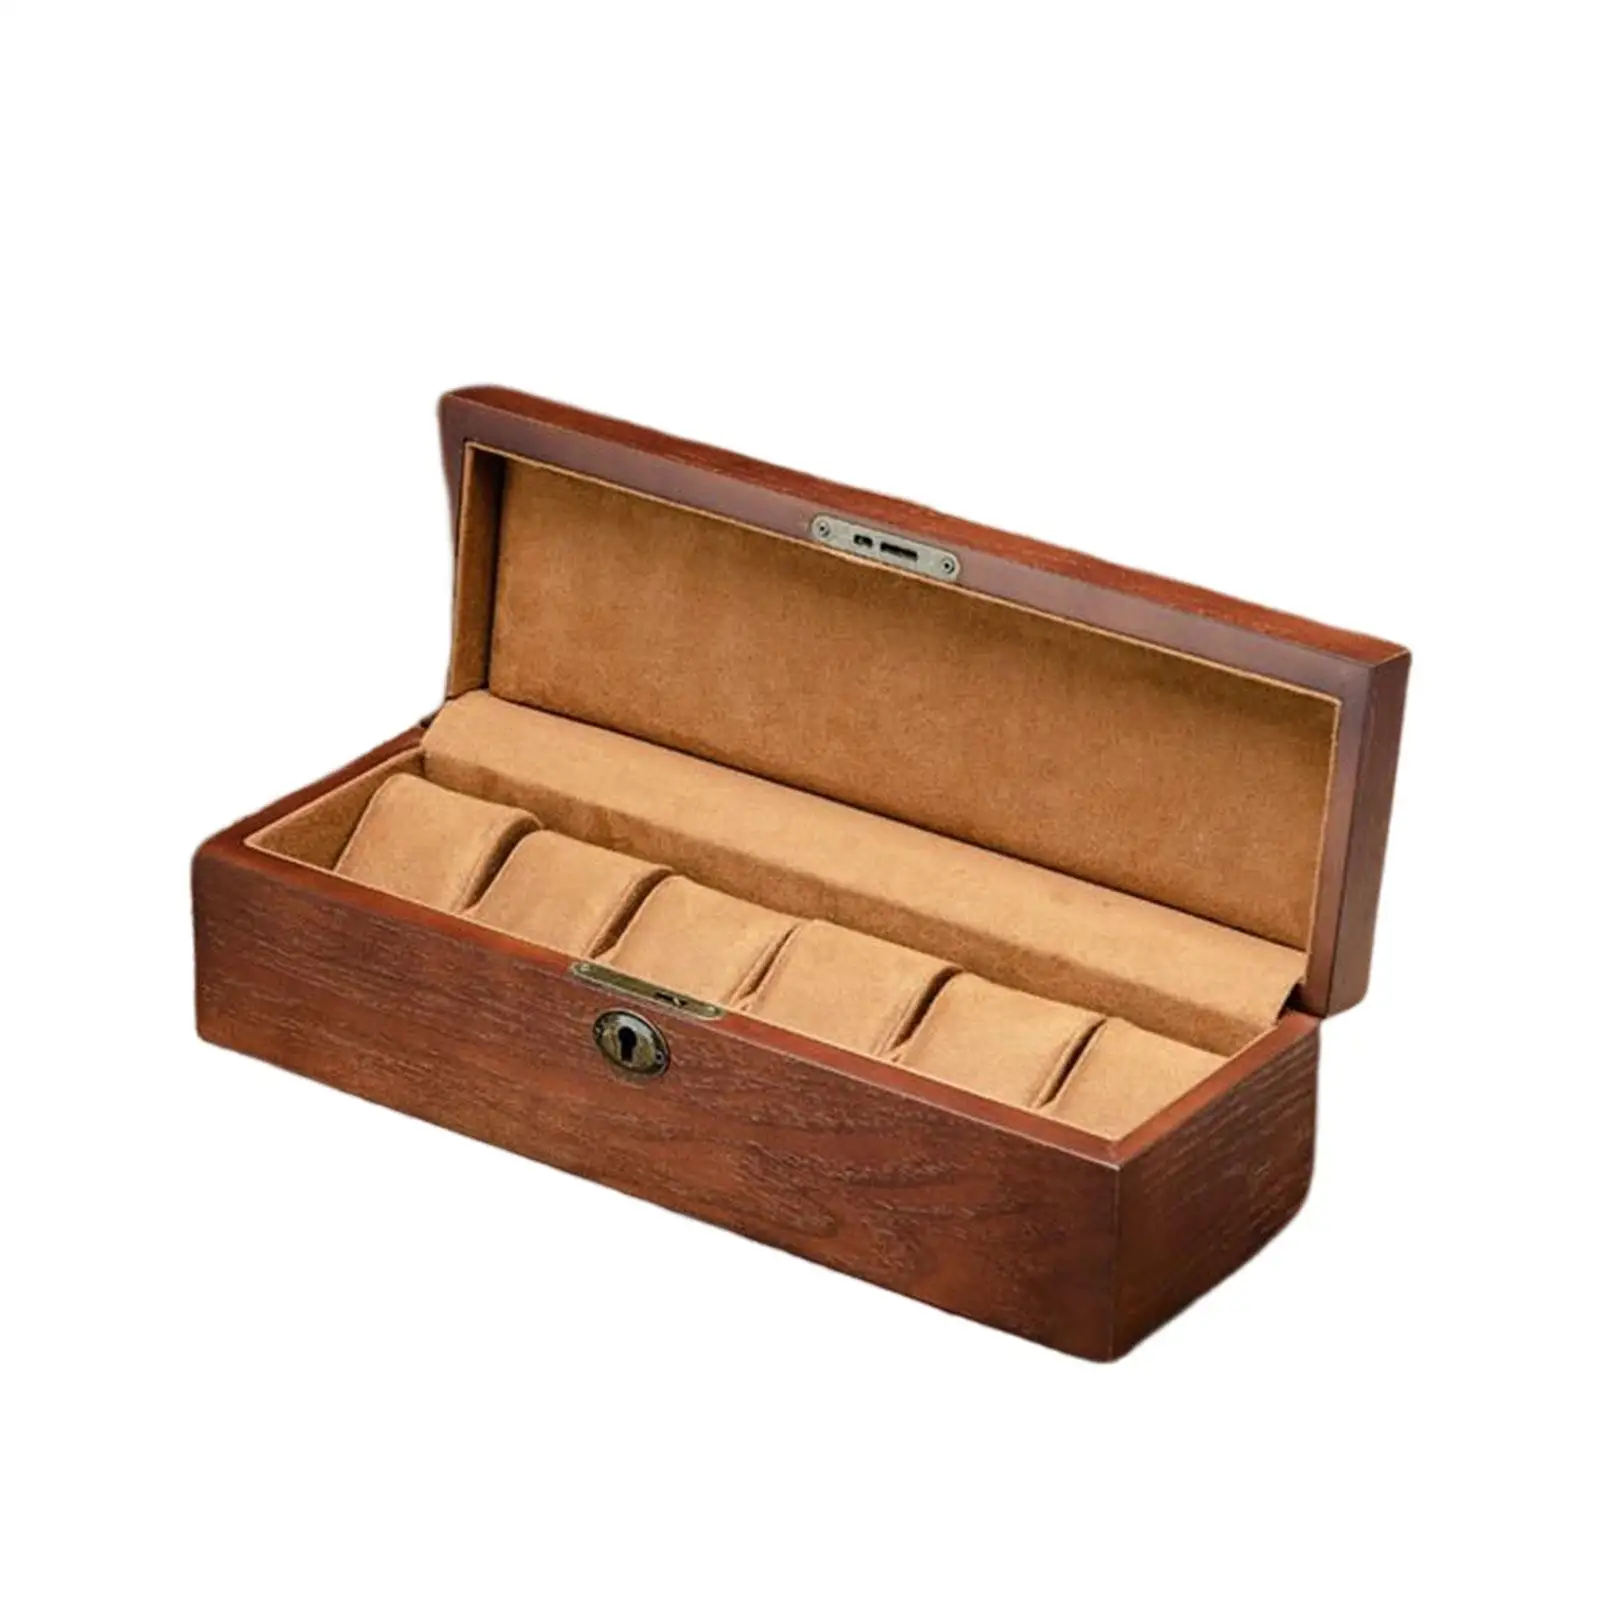 Luxury 6 Slot Wood Watch Box with Removable Pillows Watch Bracelet Display Watch Display case Organizer Birthday Gift